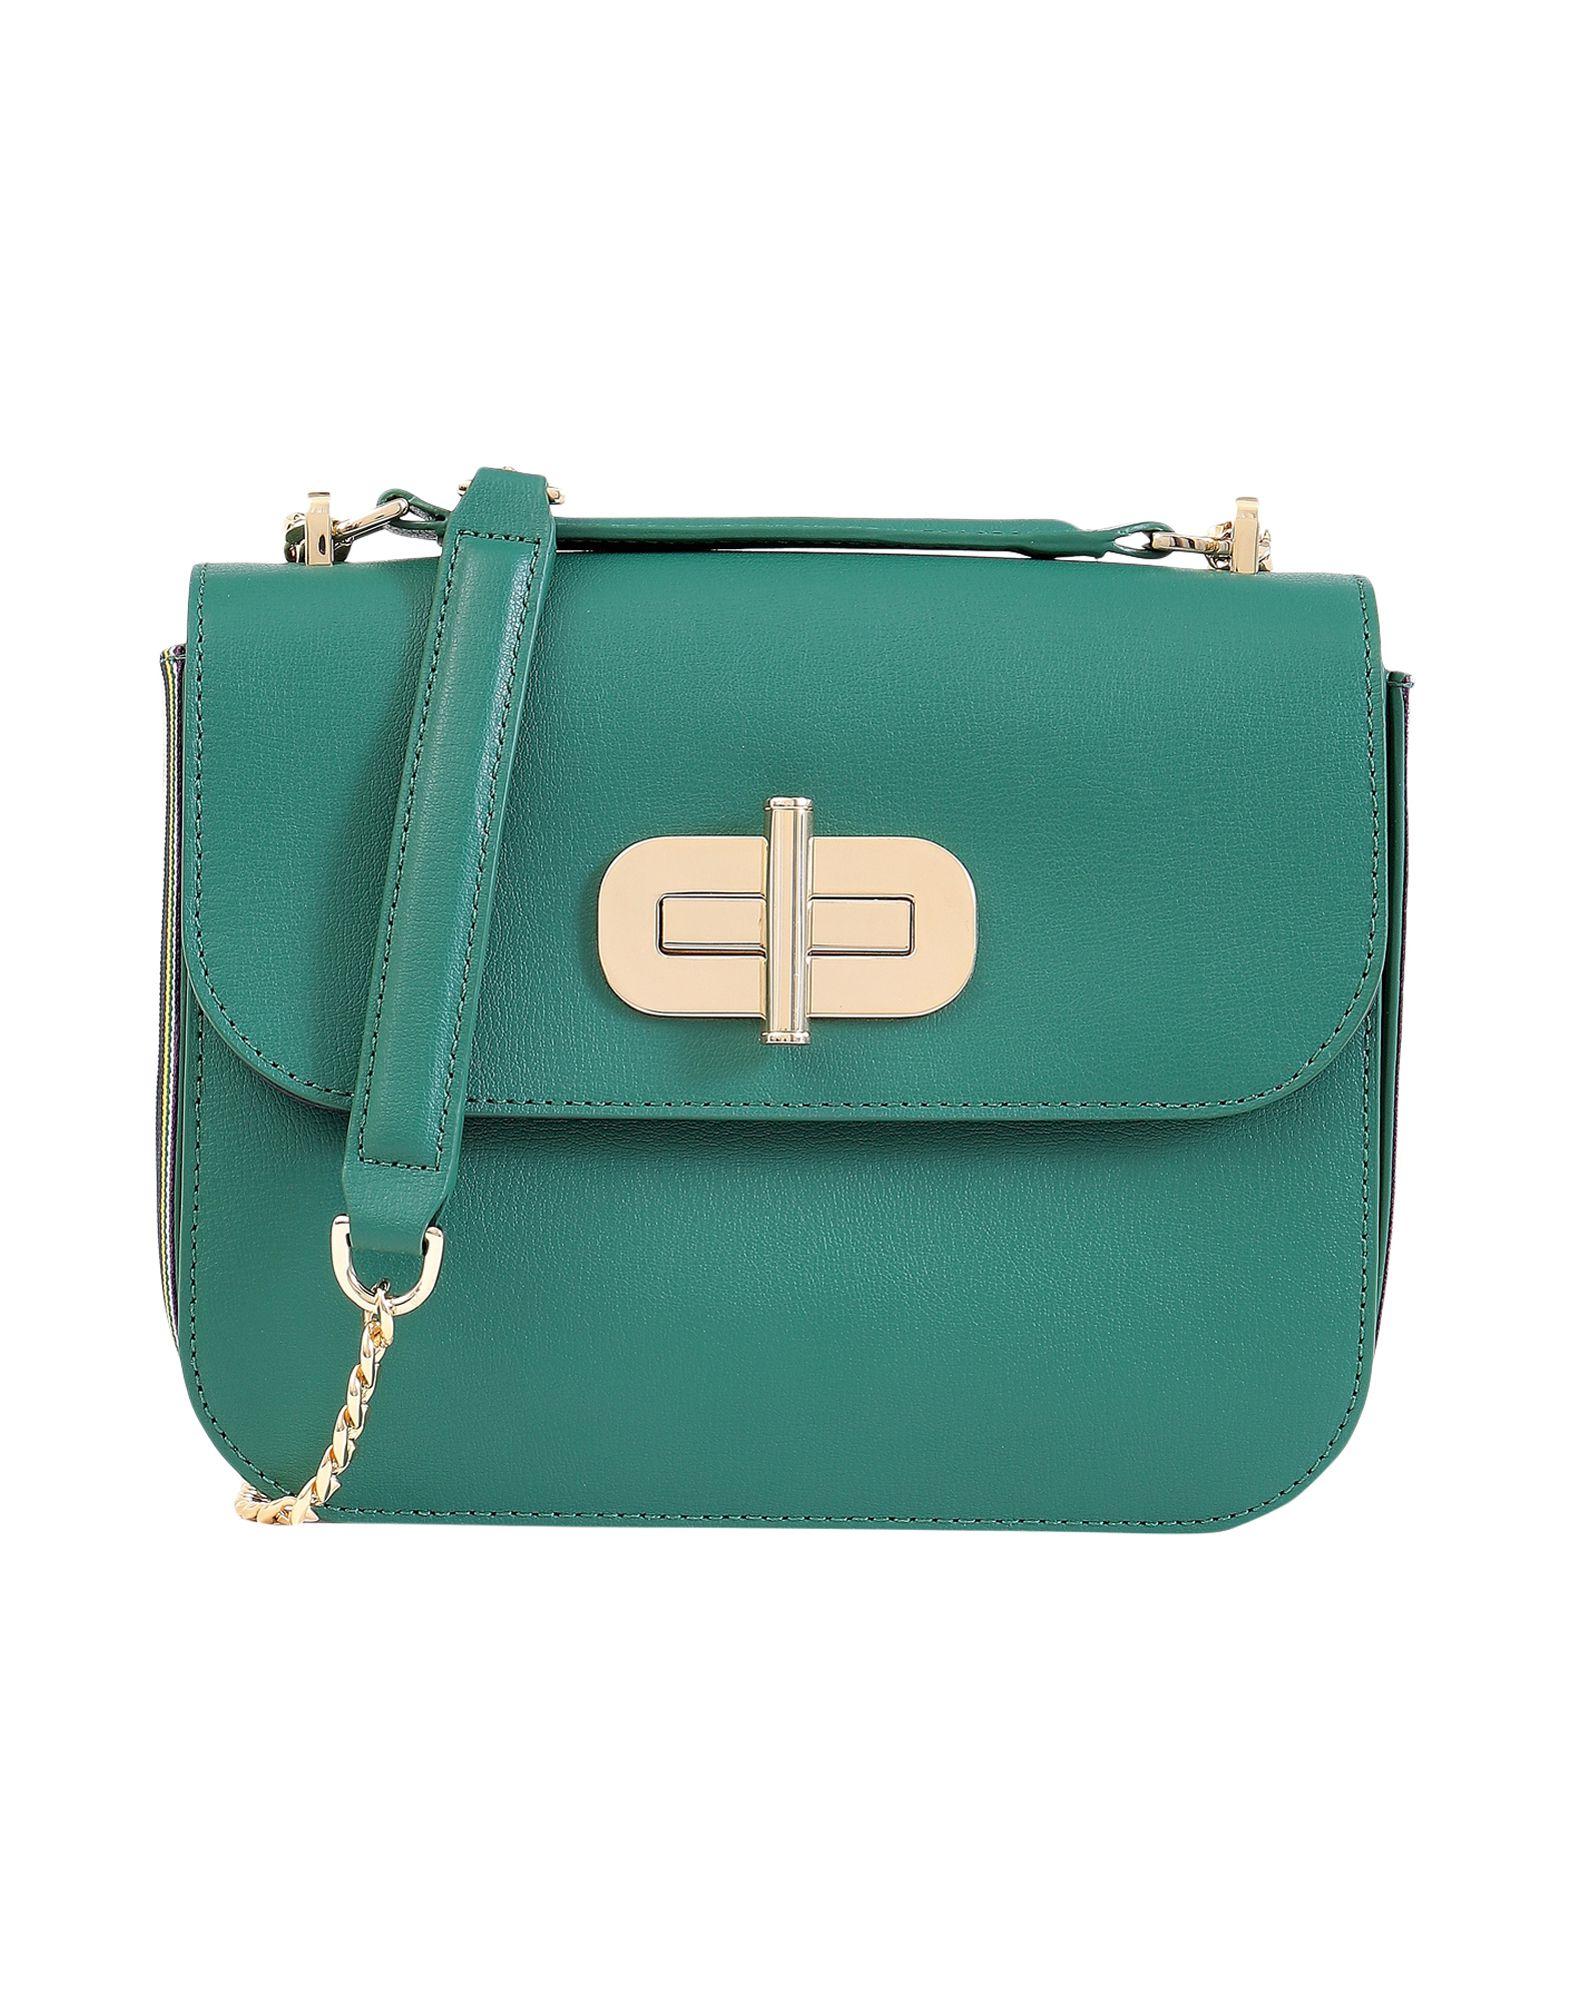 Tommy Hilfiger Leather Cross-body Bag in Green - Lyst